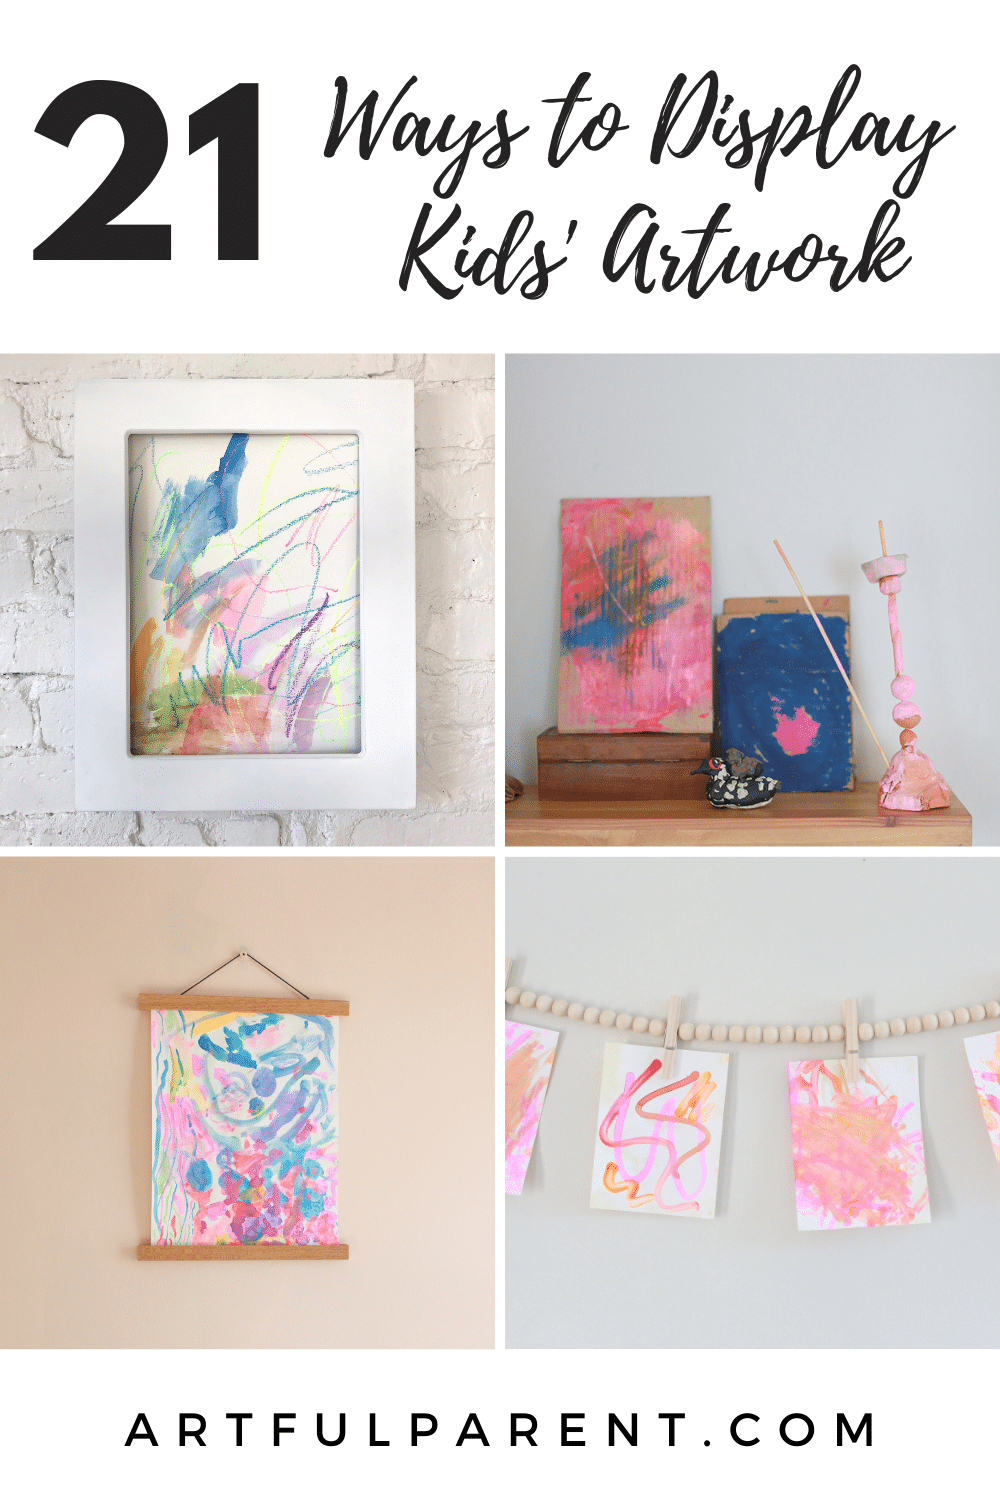 21 Kids\' Art Display Ideas for Your Home